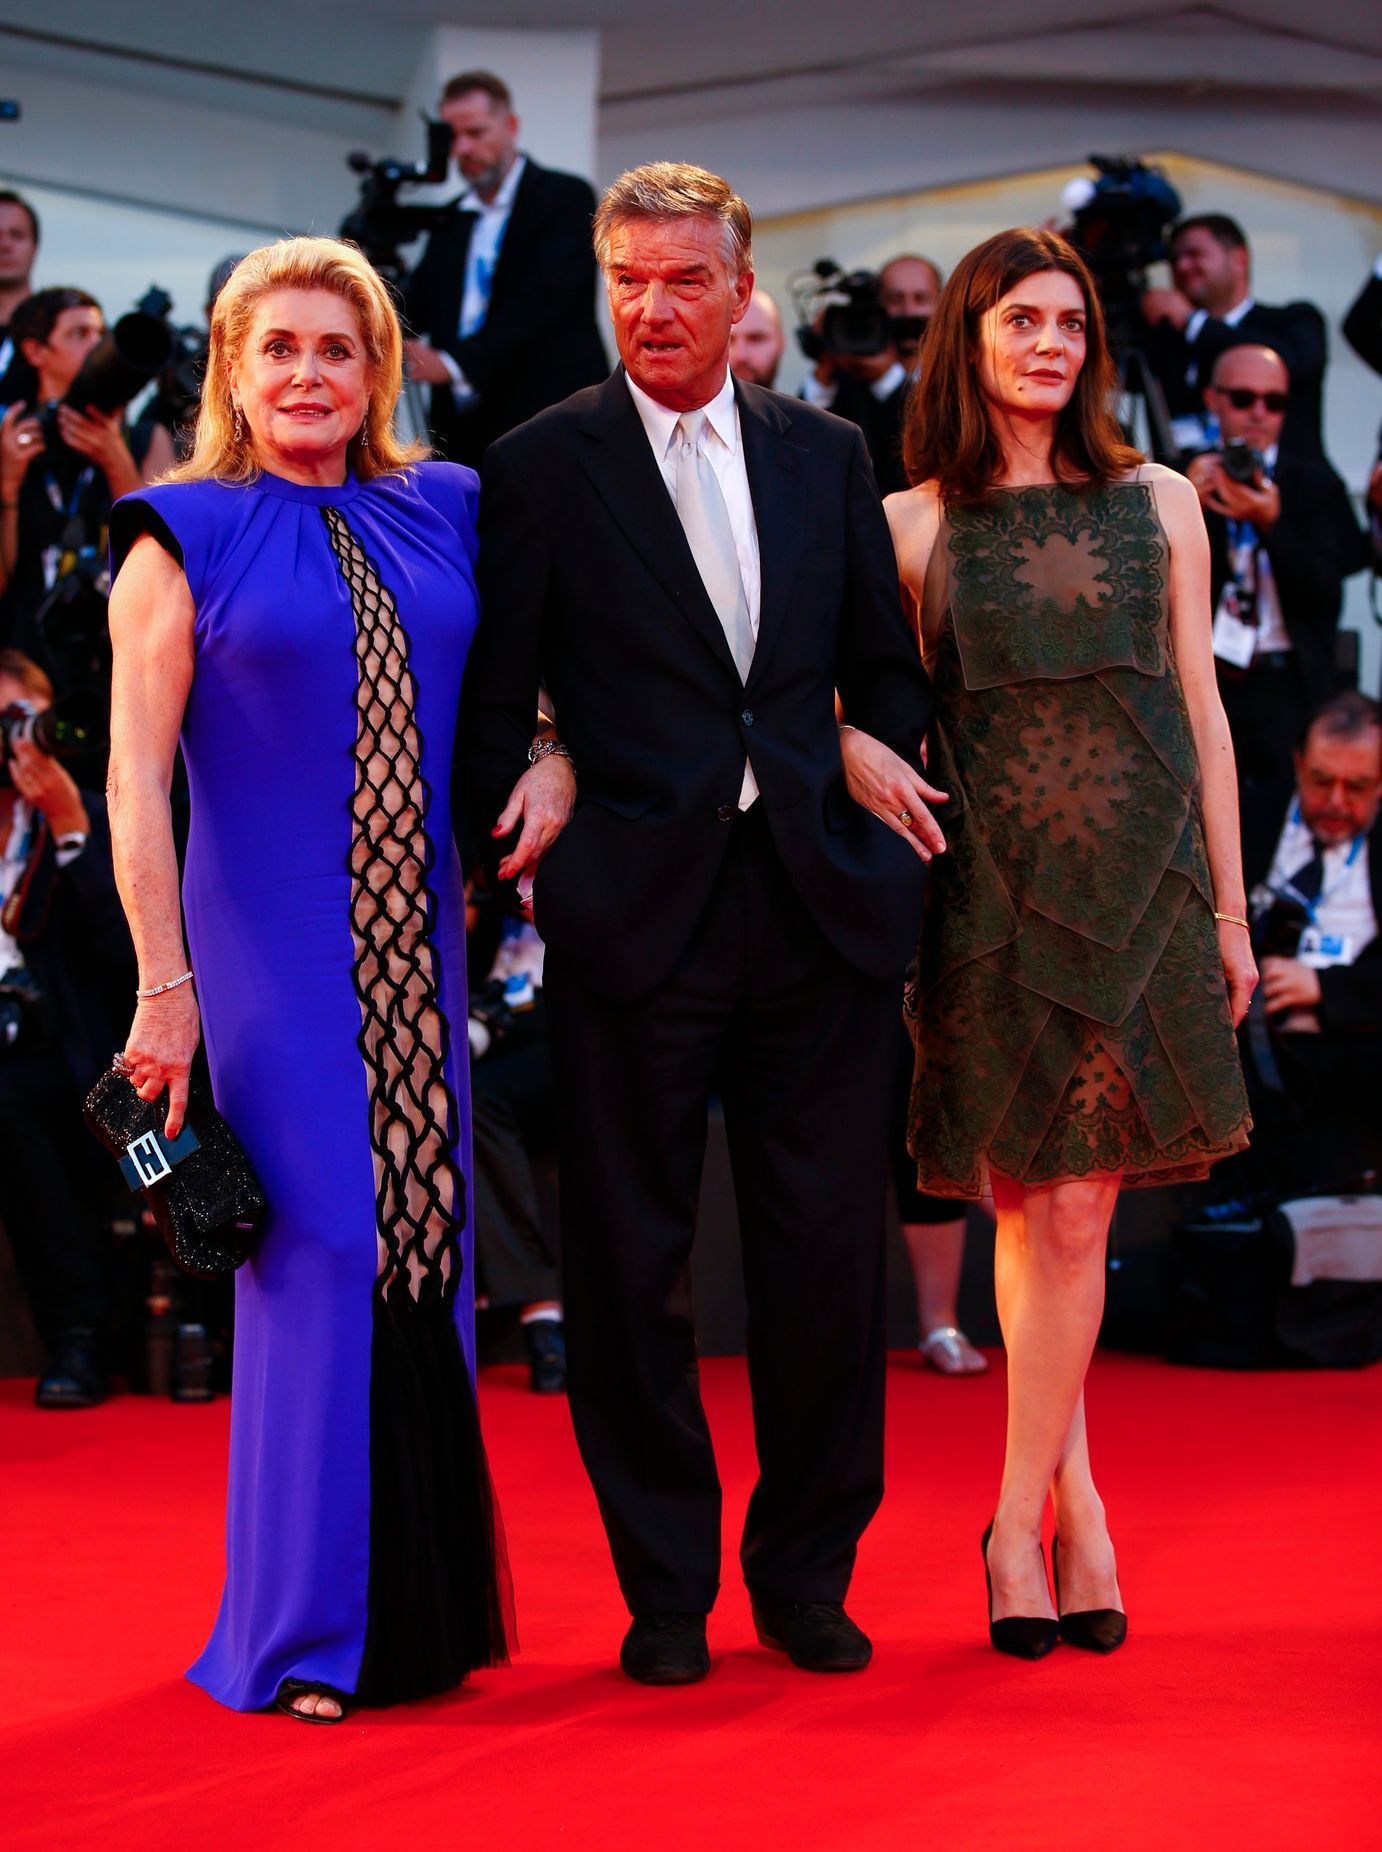 Director Jacquot poses with actresses Deneuve, and Mastroianni during the red carpet for the movie &quot;3 Coeurs&quot; (3 Hearts) at the 71st Venice Film Festival